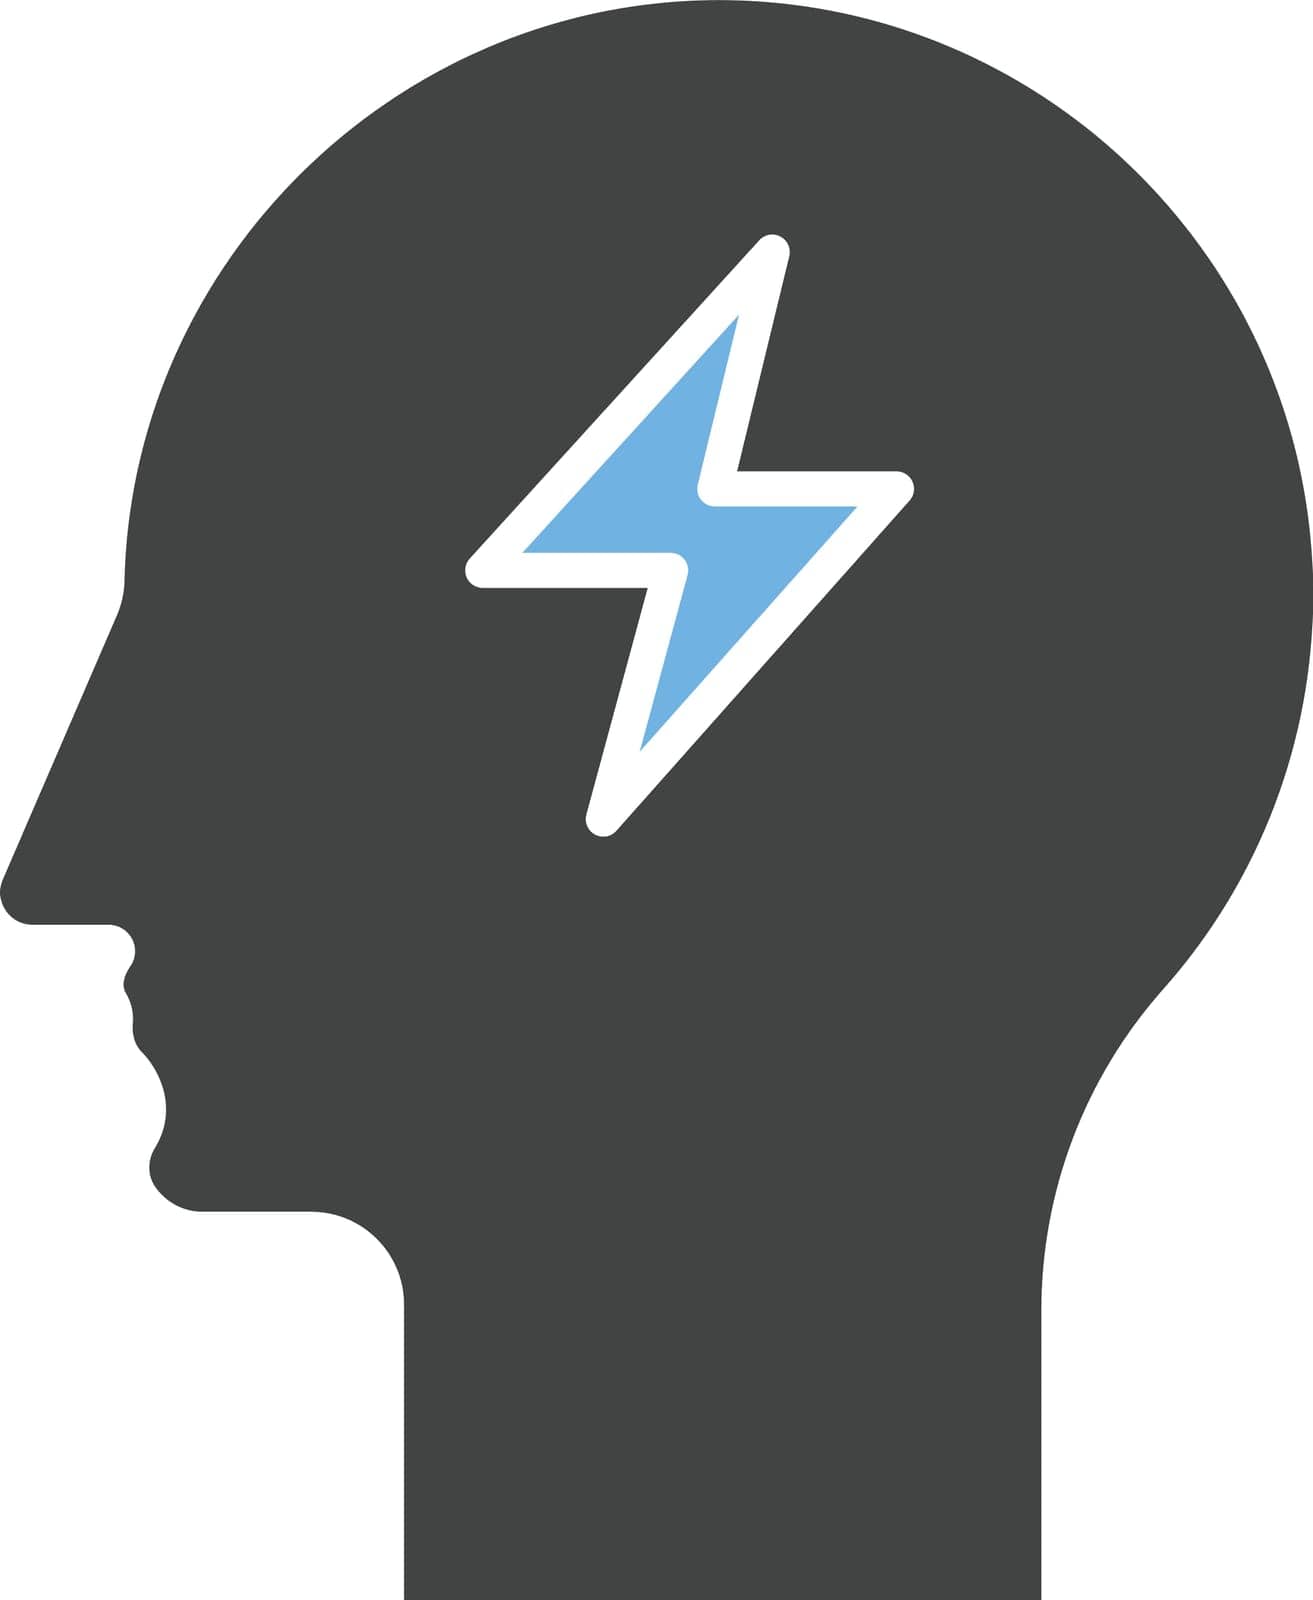 Mind Power icon vector image. Suitable for mobile application web application and print media.